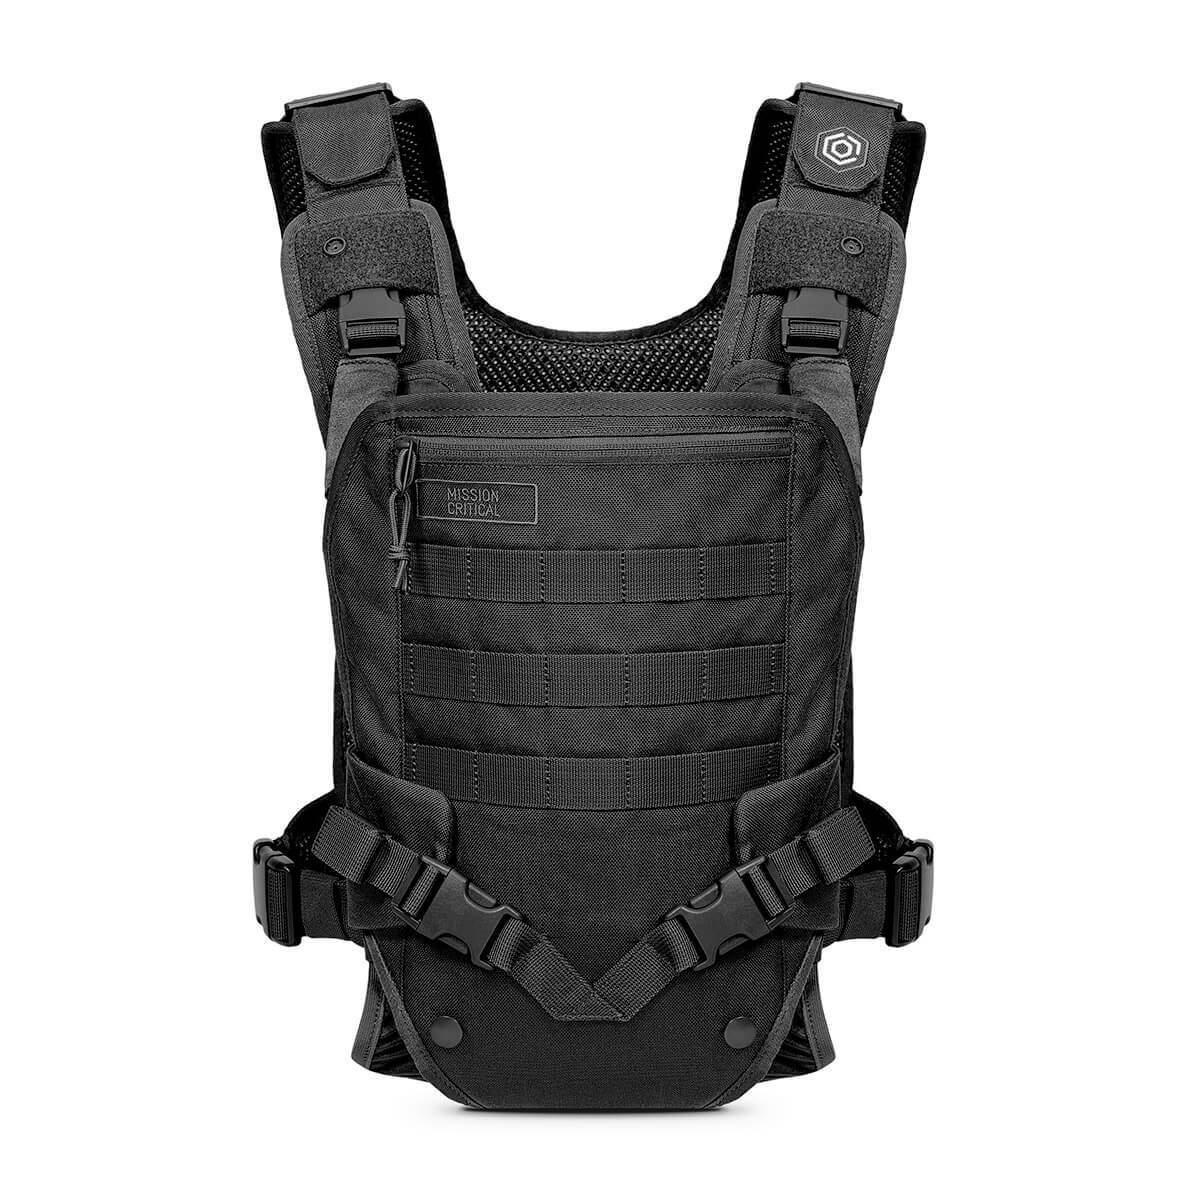 S.01 Action Baby Carrier - Excursion Kit